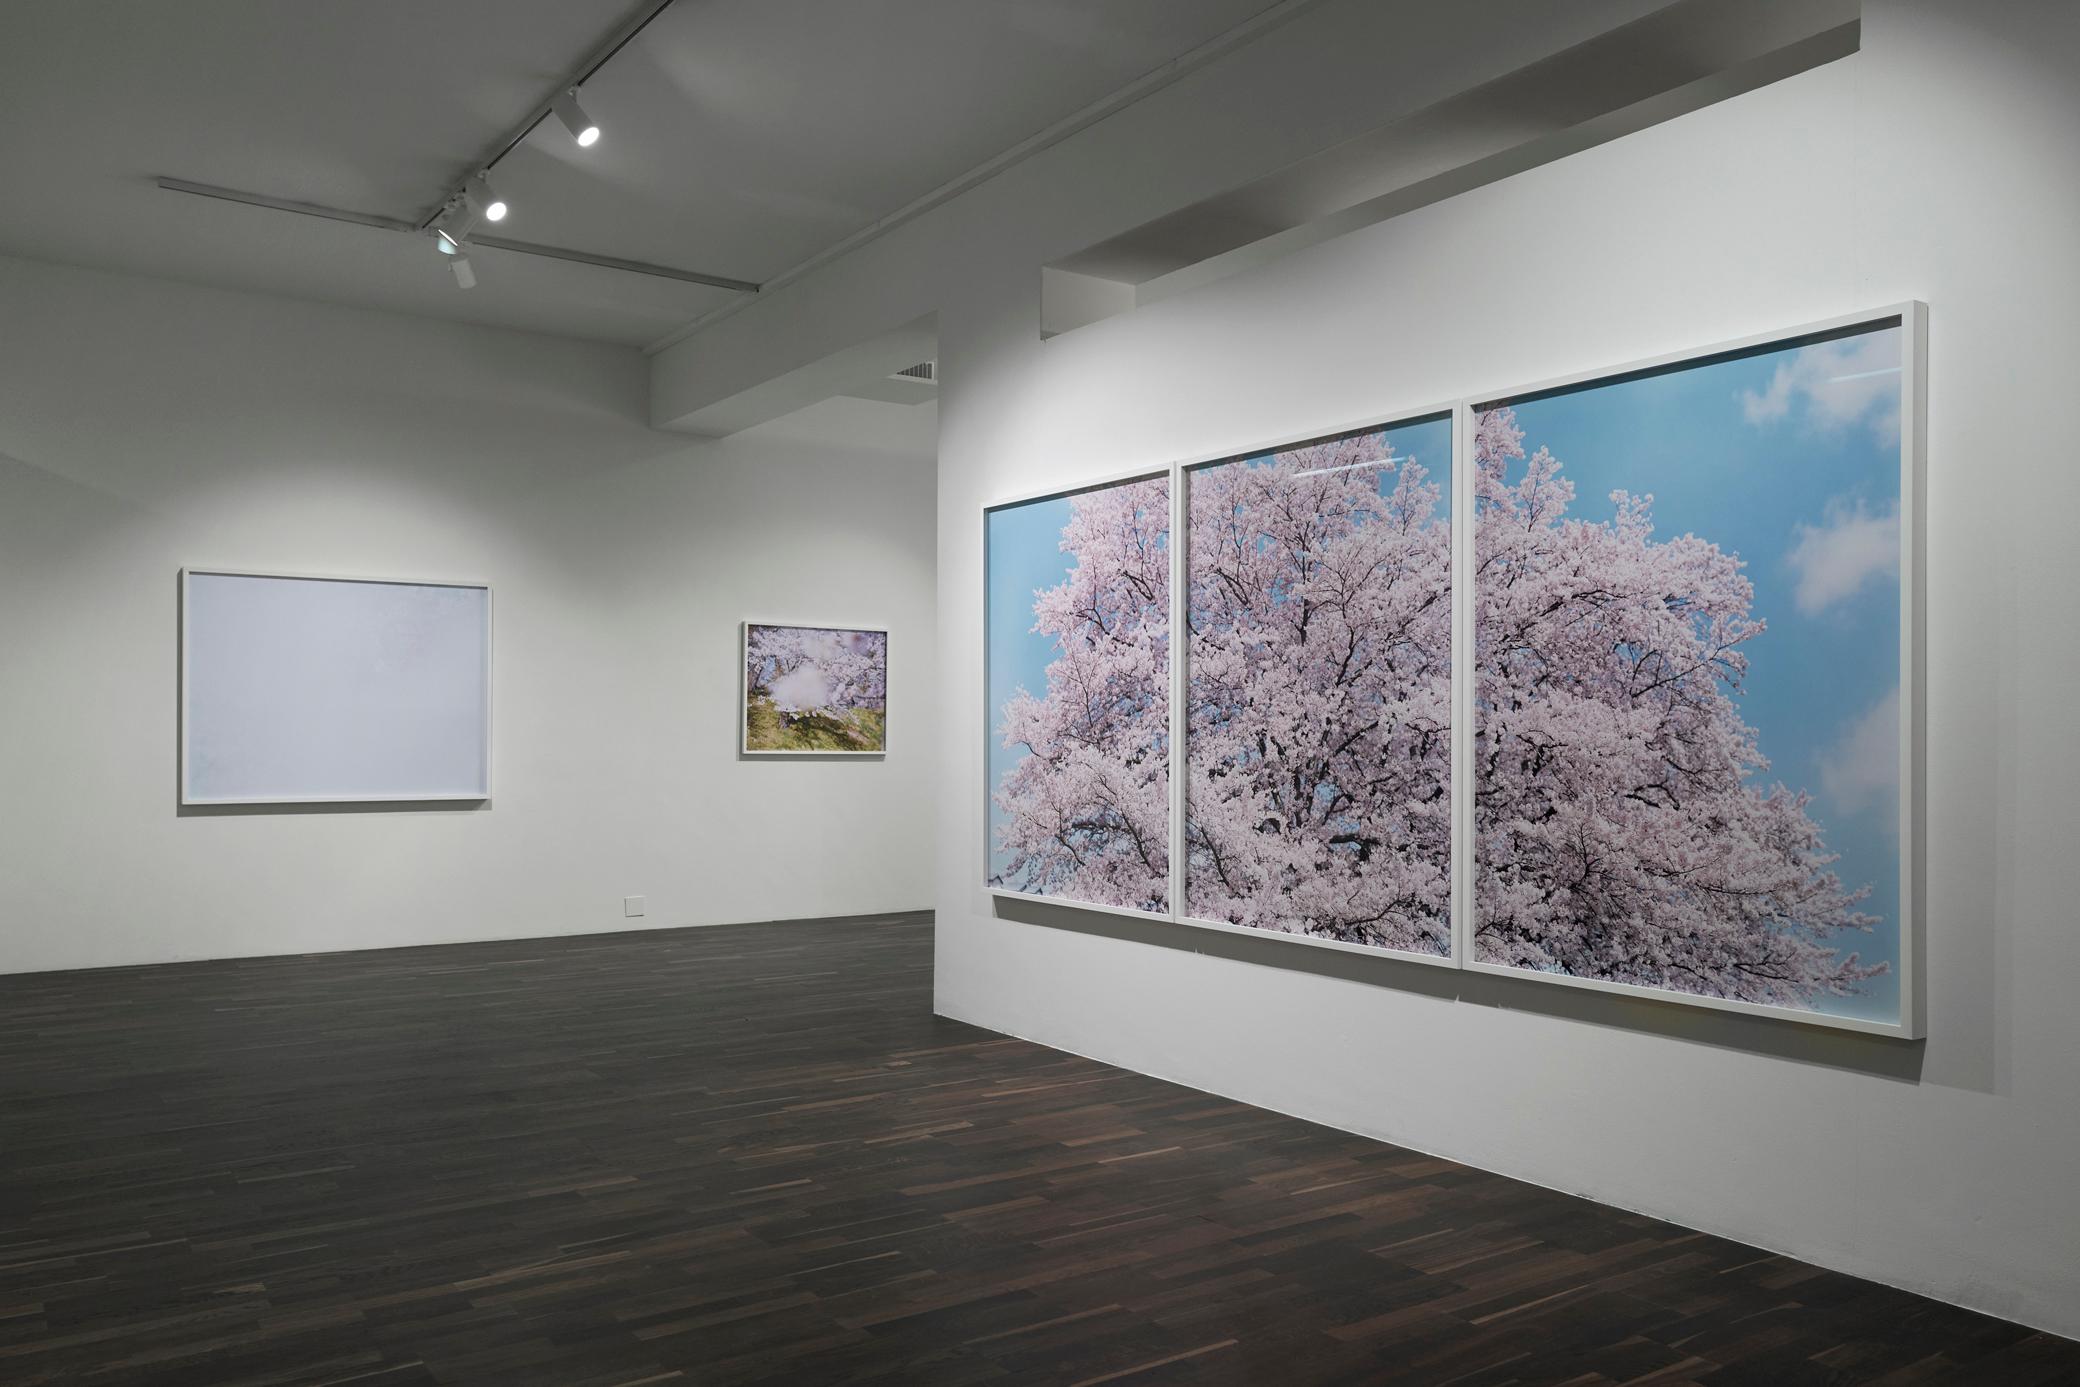 RISAKU SUZUKI (*1963, Japan)
SAKURA 19,4-357, 358, 359 (Triptych)
2019
Chromogenic print
(3x) Sheets 155 x 120 cm (61 x 47 1/4 in.)
Overall 155 x 360 cm (61 x 141 3/4 in.)
Edition of 5, plus 1 AP; Ed. no. 2/5
Framed

This photograph belongs to the